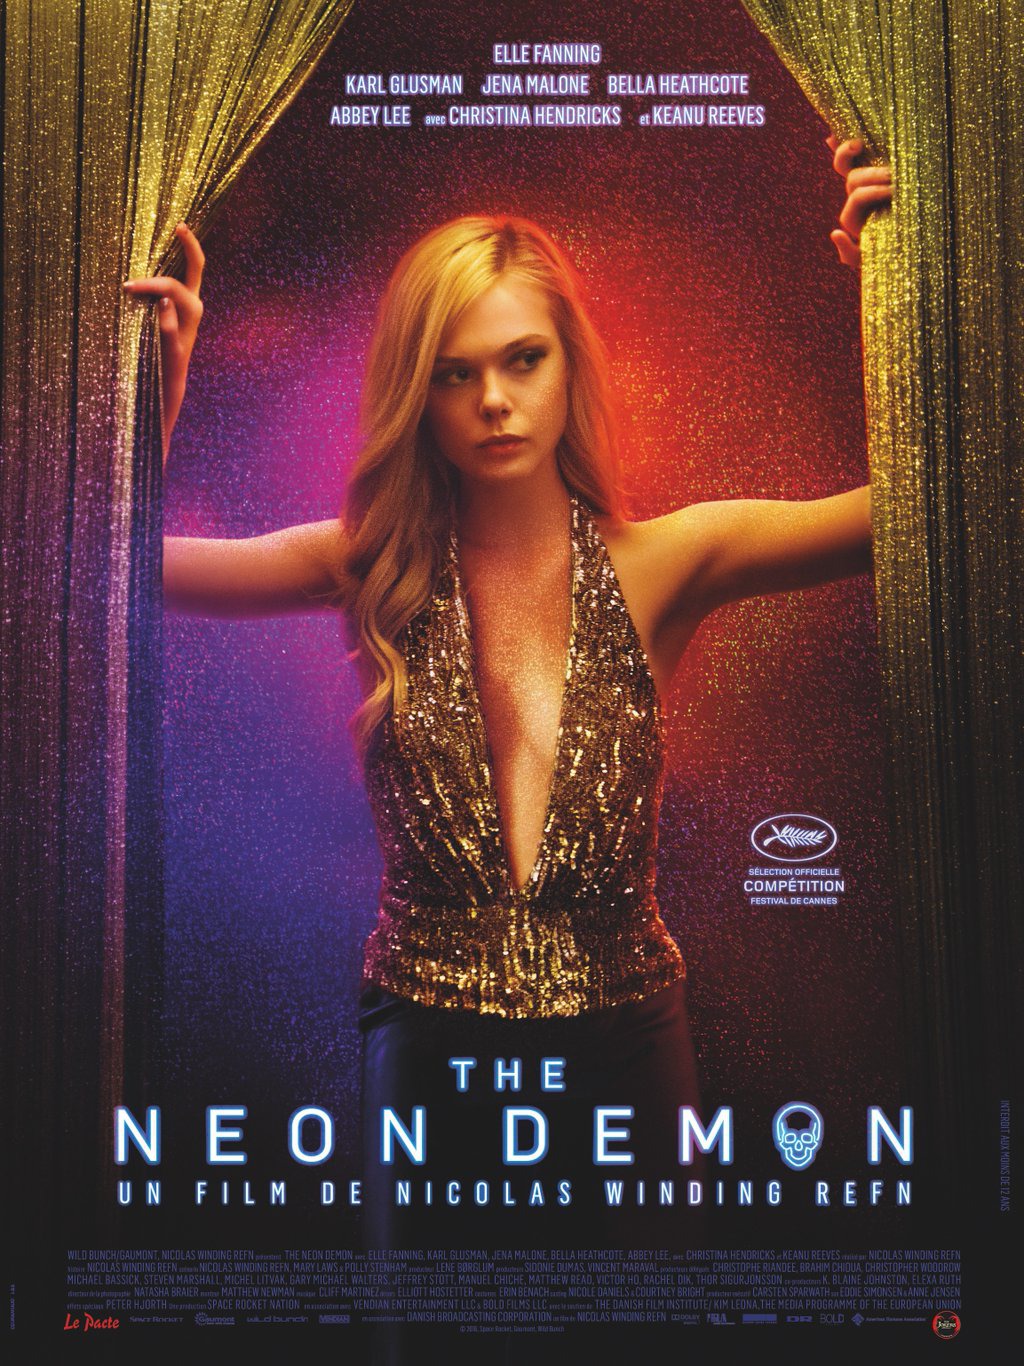 Elle Fanning Opens The Curtain On Poster For Nicolas Winding Refn's 'The Neon Demon'